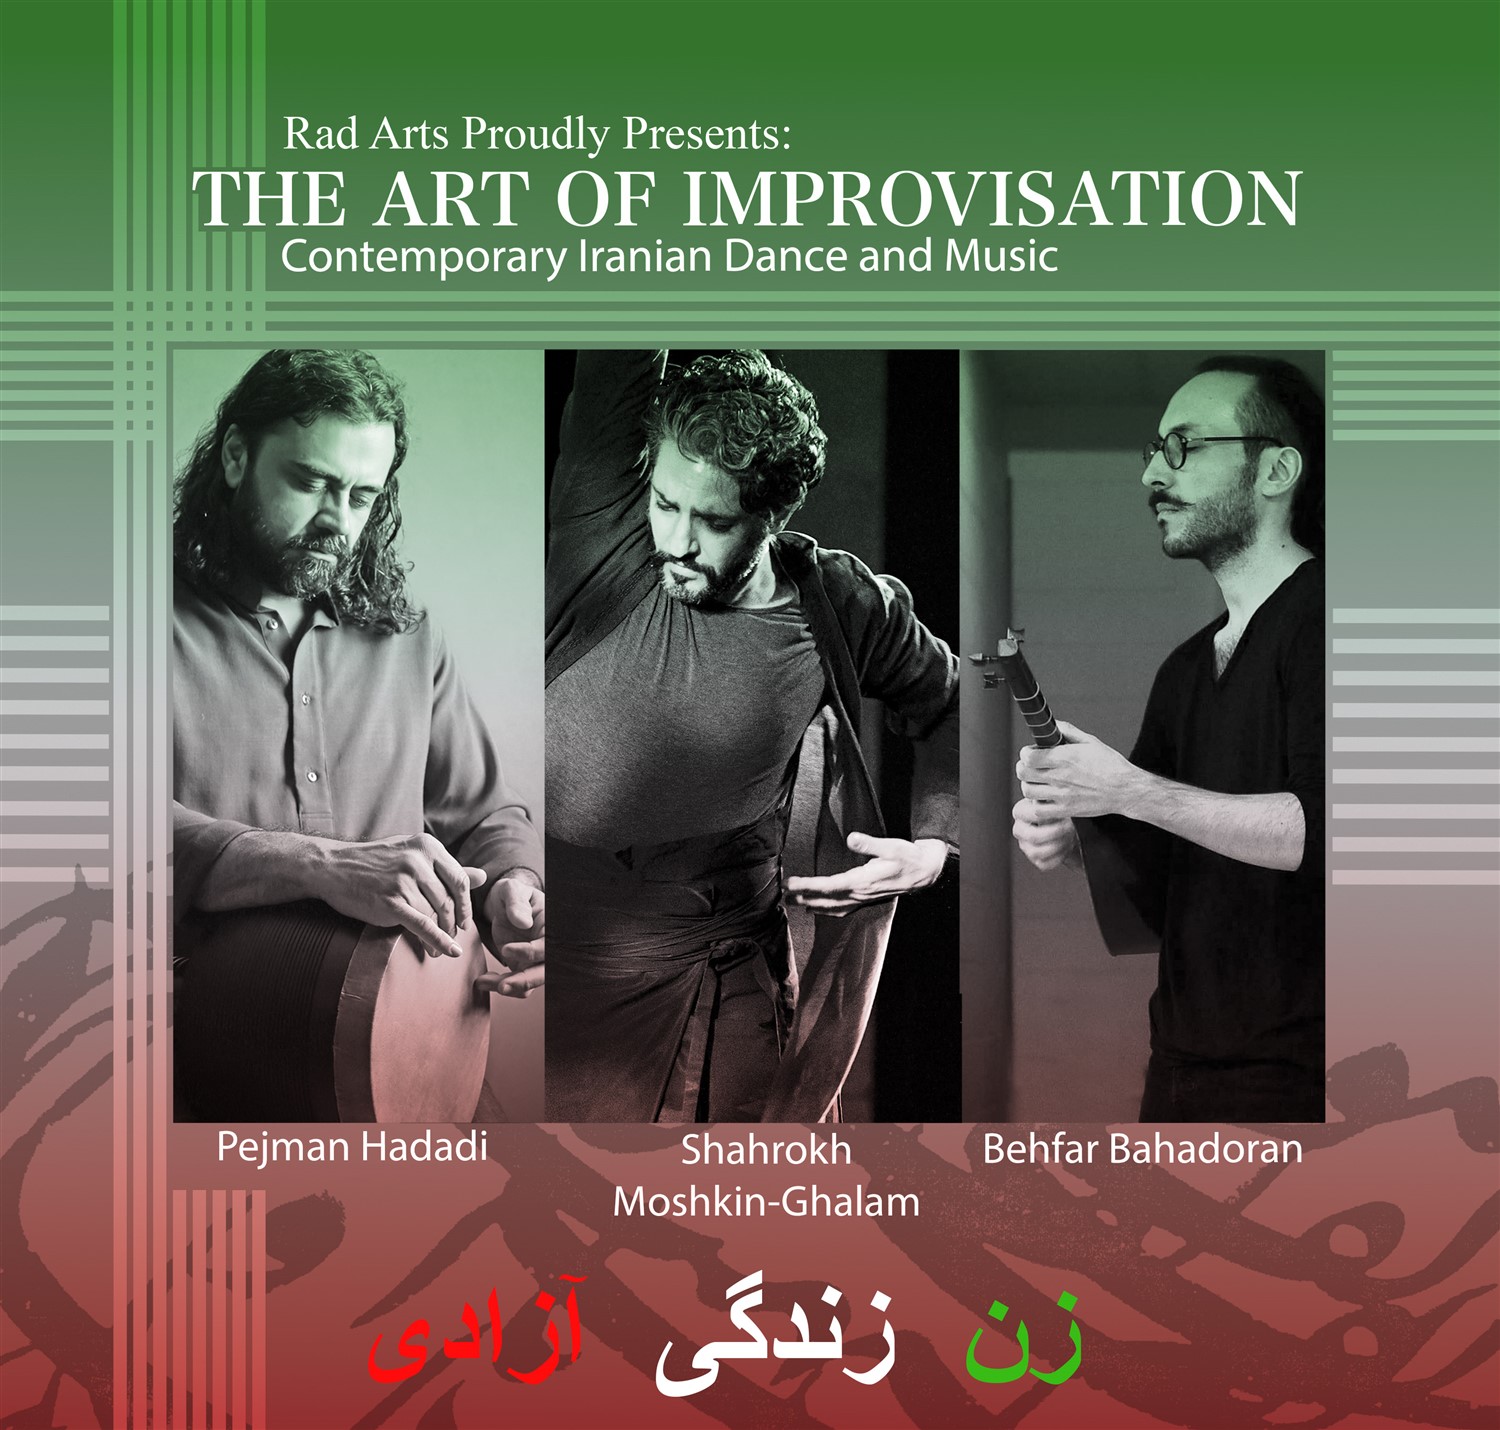 THE ART OF IMPROVISATION Contemporary Iranian Dance and Music on oct. 23, 19:00@Zipper Concert Hall - Pick a seat, Buy tickets and Get information on RAD ARTS radarts